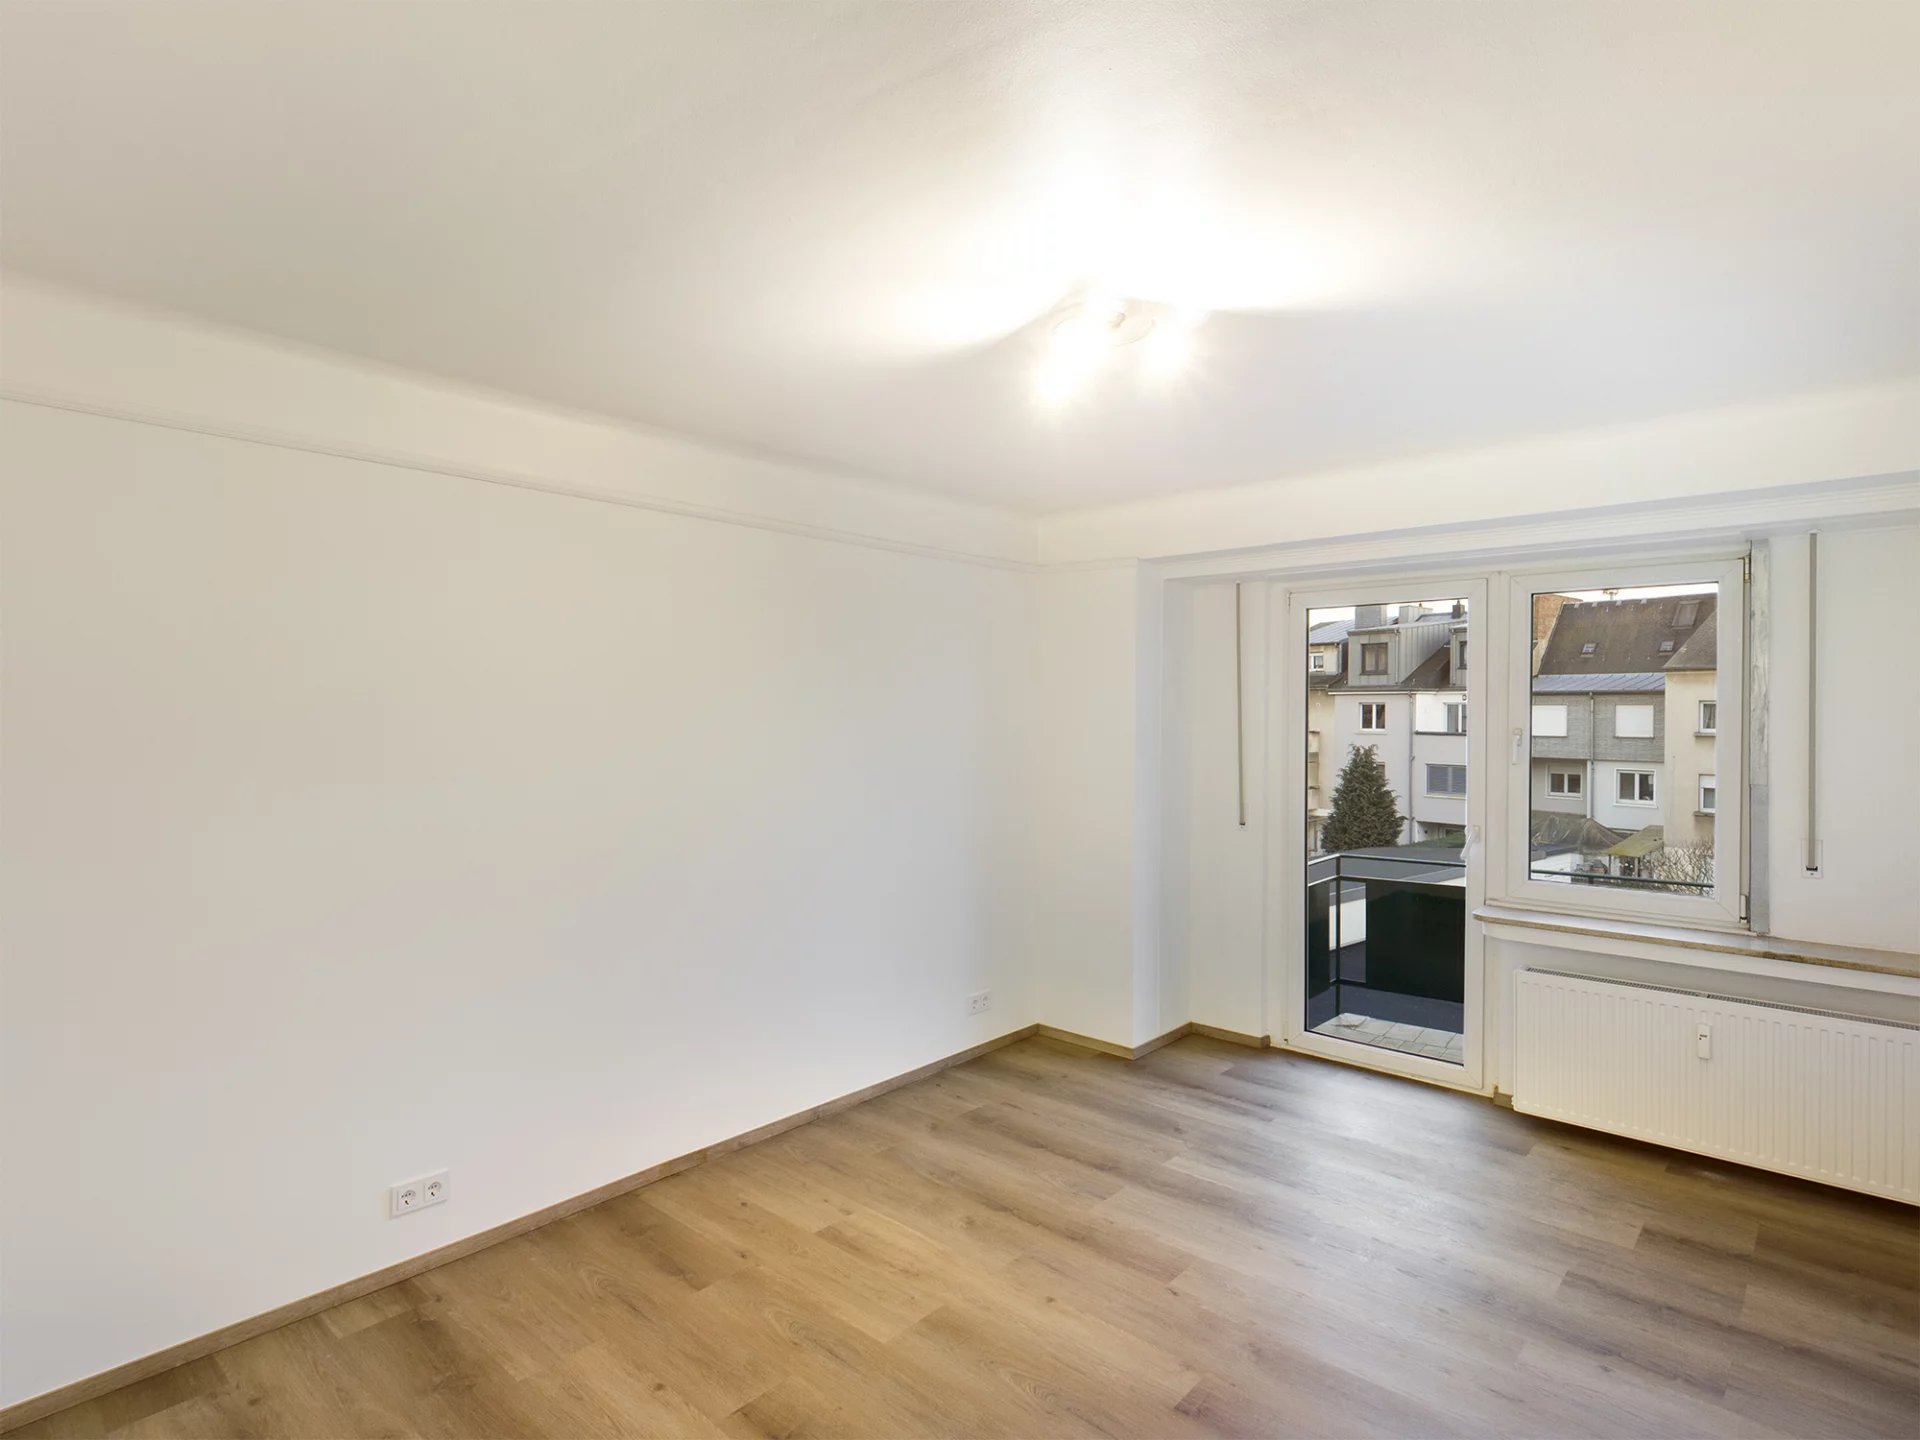 2-bedroom apartment for rent in Luxembourg-Hollerich